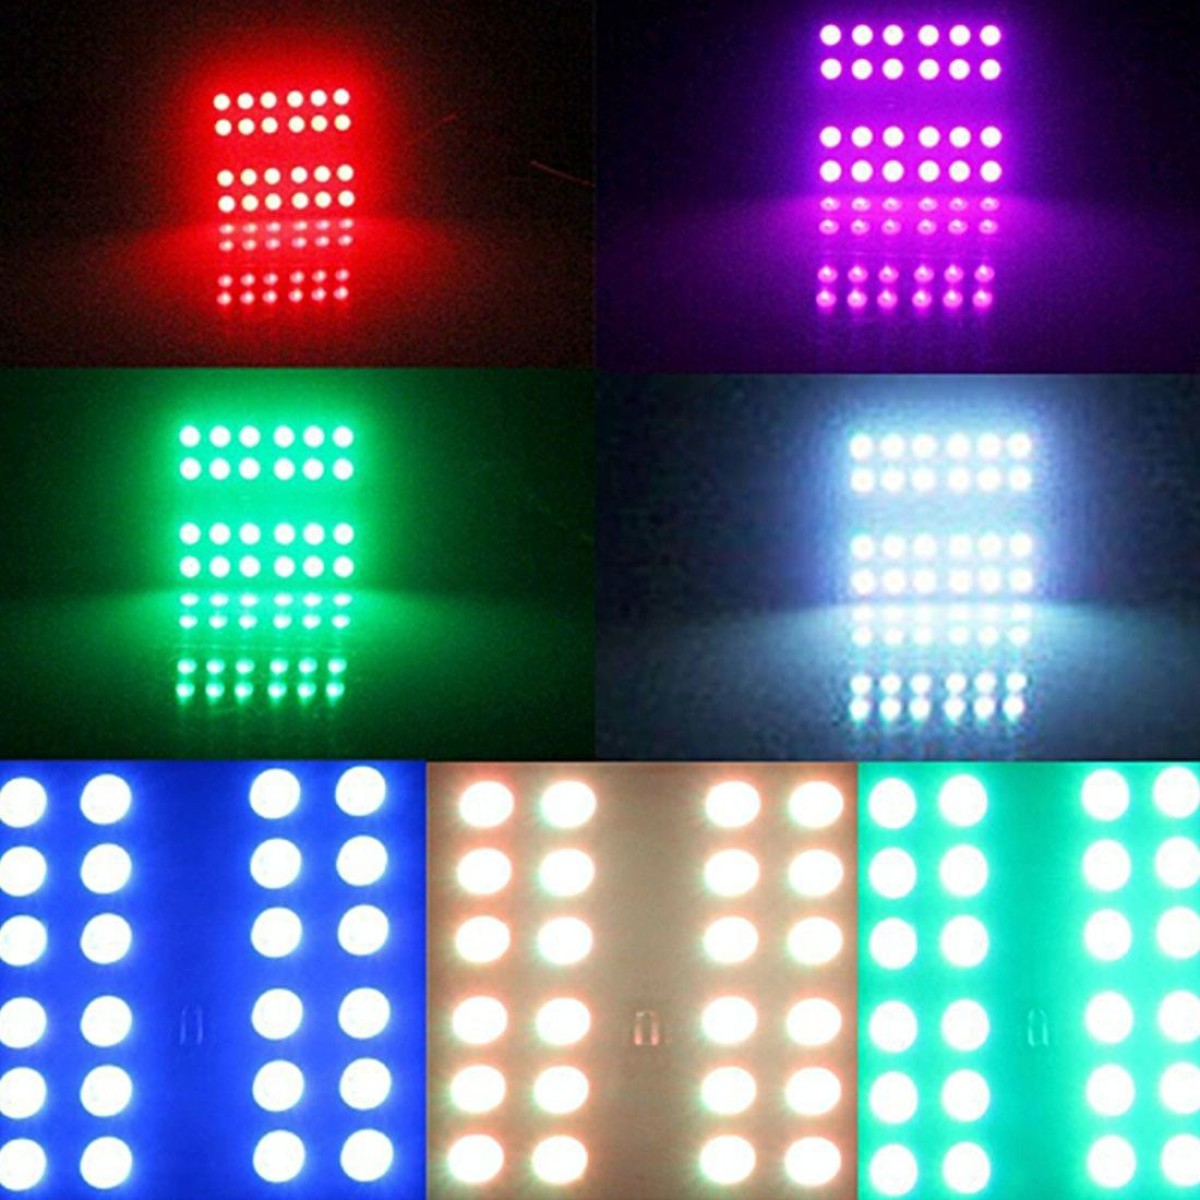 2 PCS Colorful 36MM T10 Port Remote Control Car Dome Lamp LED Reading Light with 6 LED Lights